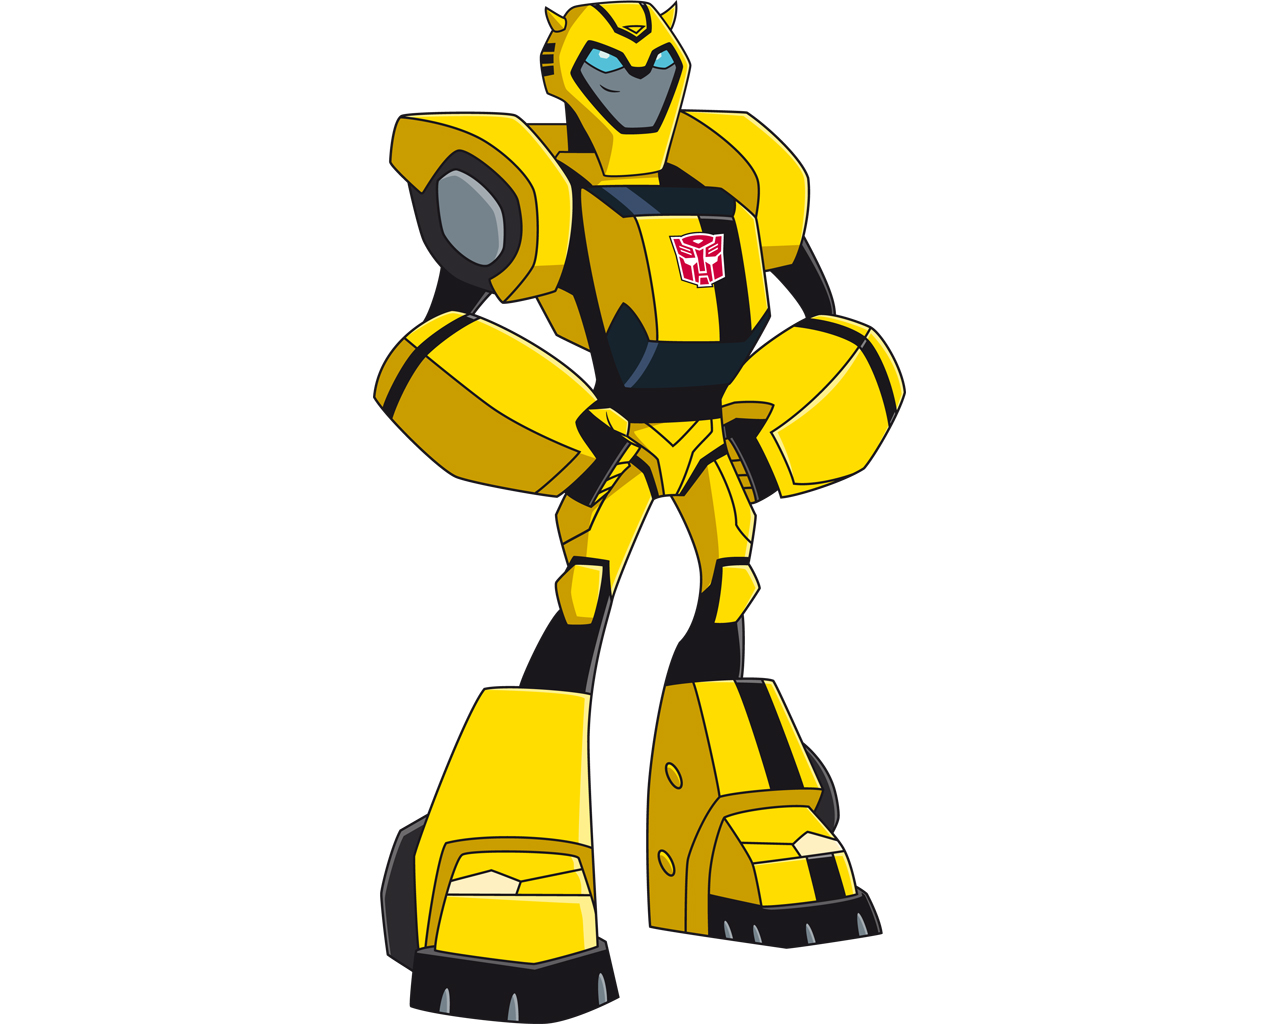 Transformers clipart free download clip art on 8